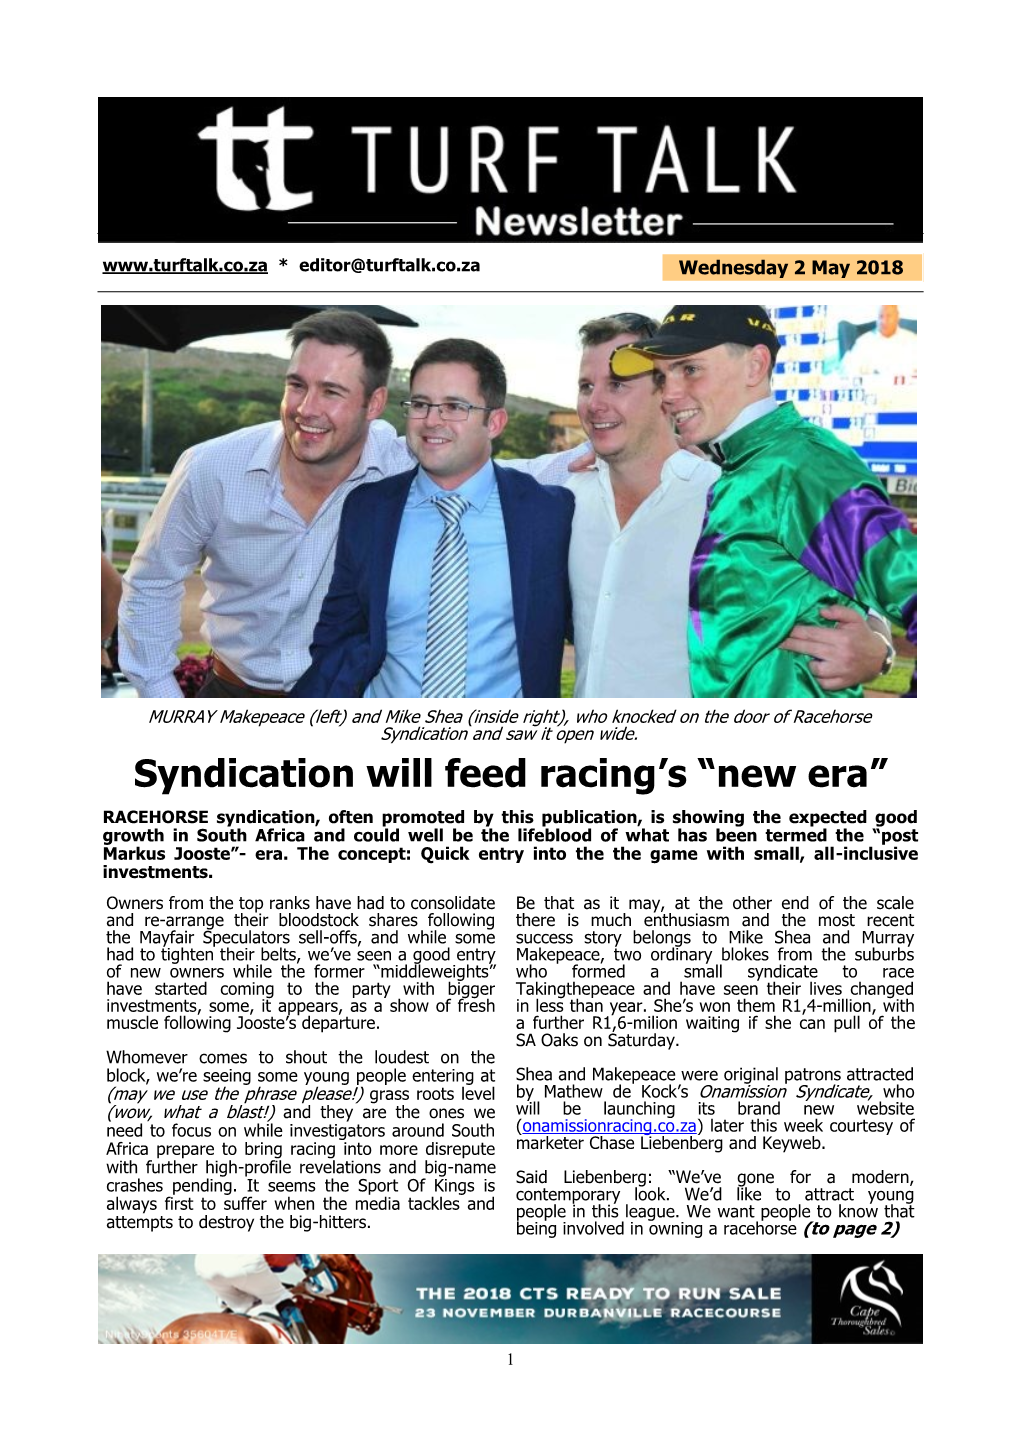 Syndication Will Feed Racing׳S “New Era״